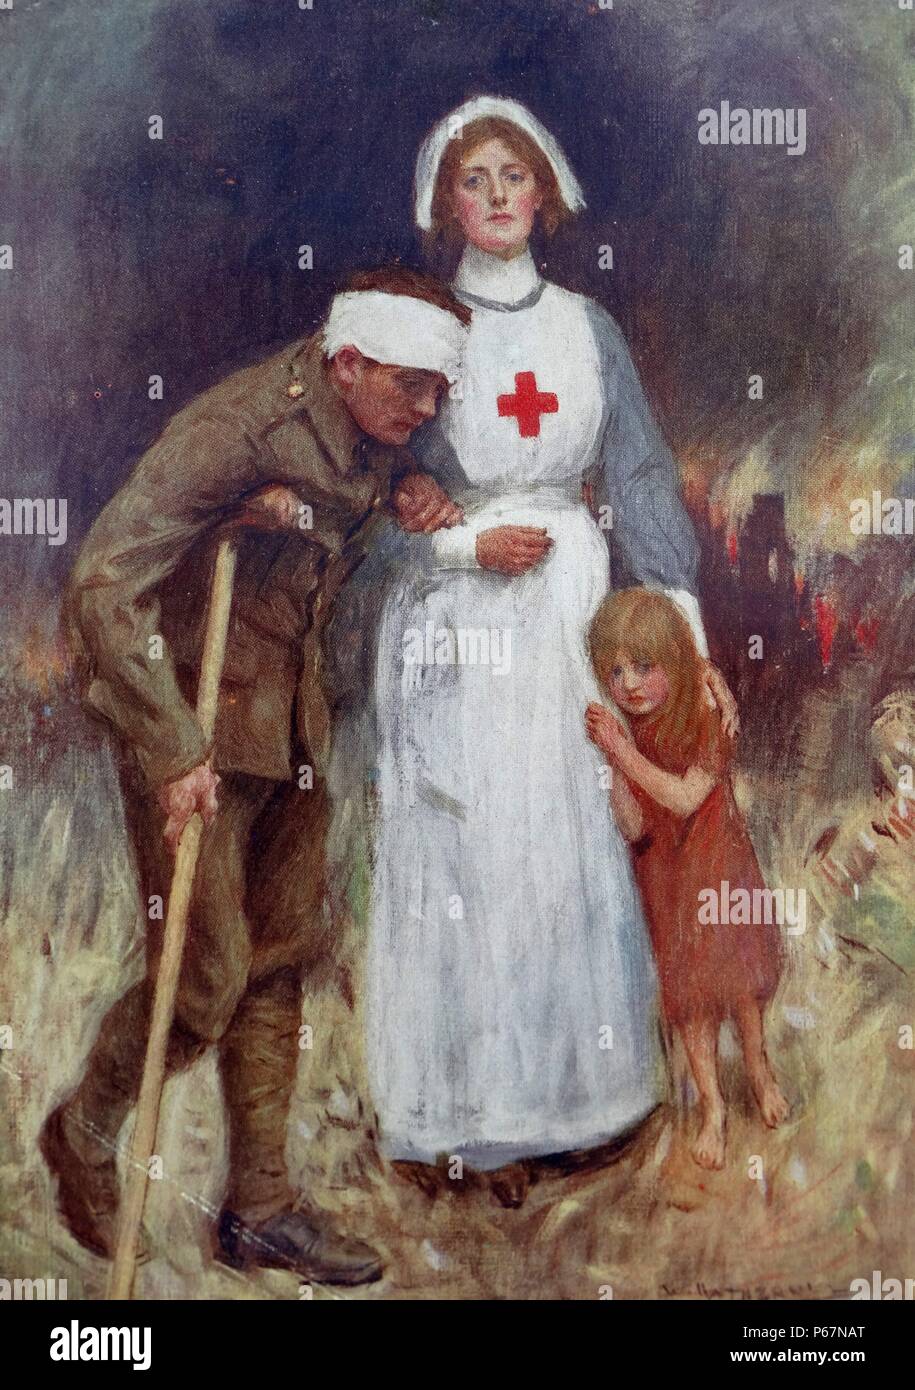 Illustration depicting an idealised image of nurse helping a wounded British soldier and a young child to safety, World War I, 1915. Stock Photo